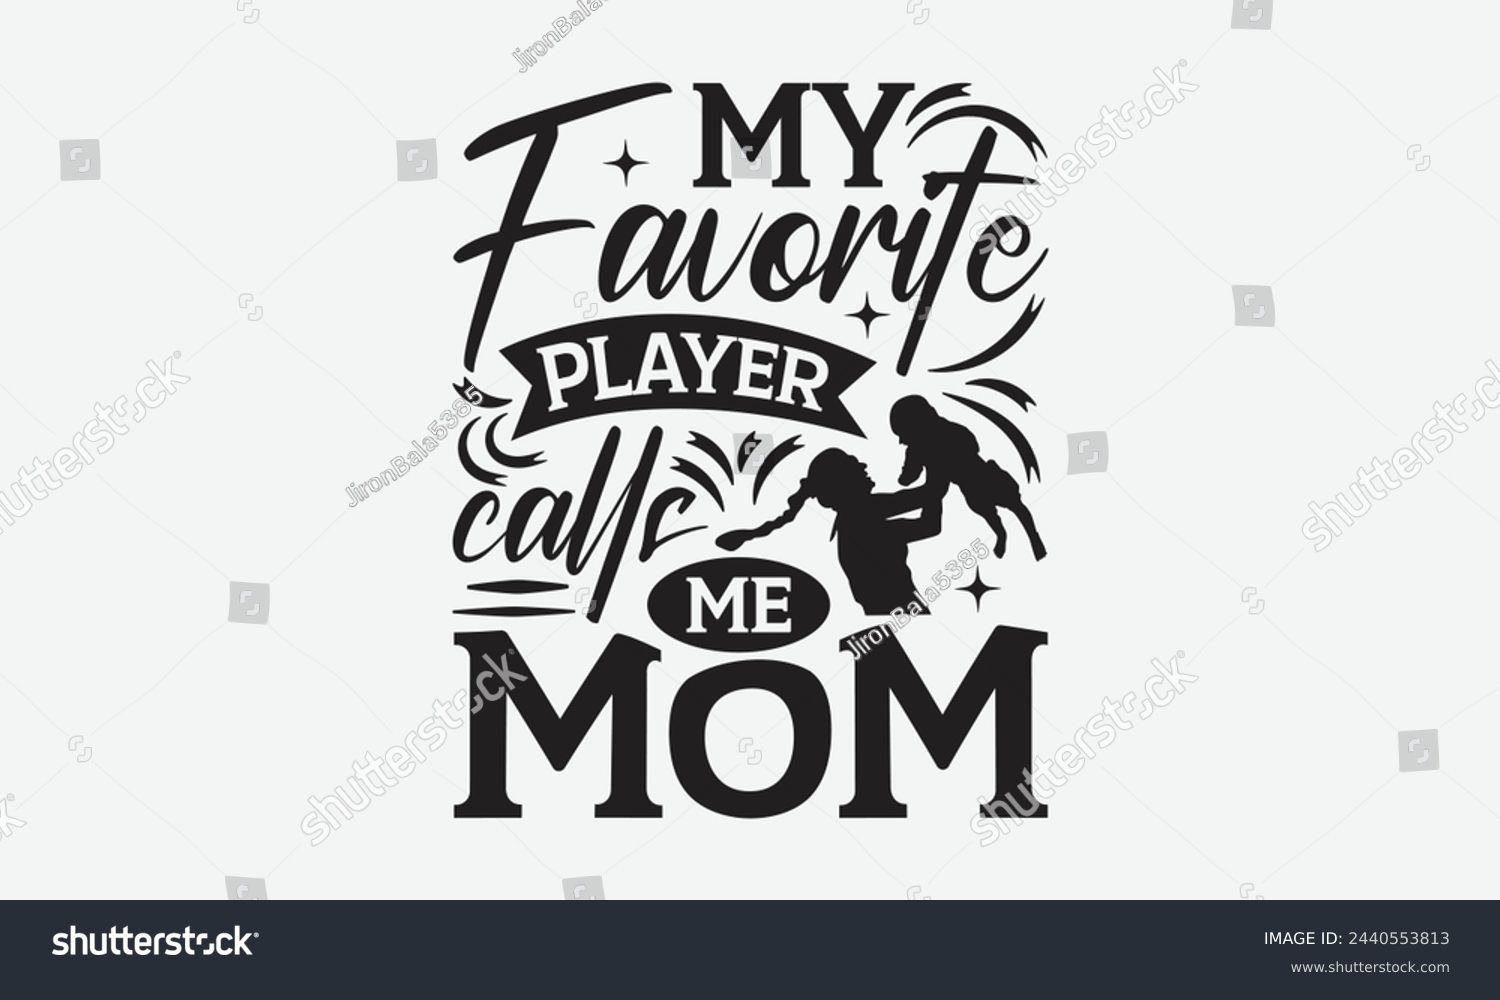 SVG of My favorite player calls me mom - Mom t-shirt design, isolated on white background, this illustration can be used as a print on t-shirts and bags, cover book, template, stationary or as a poster. svg